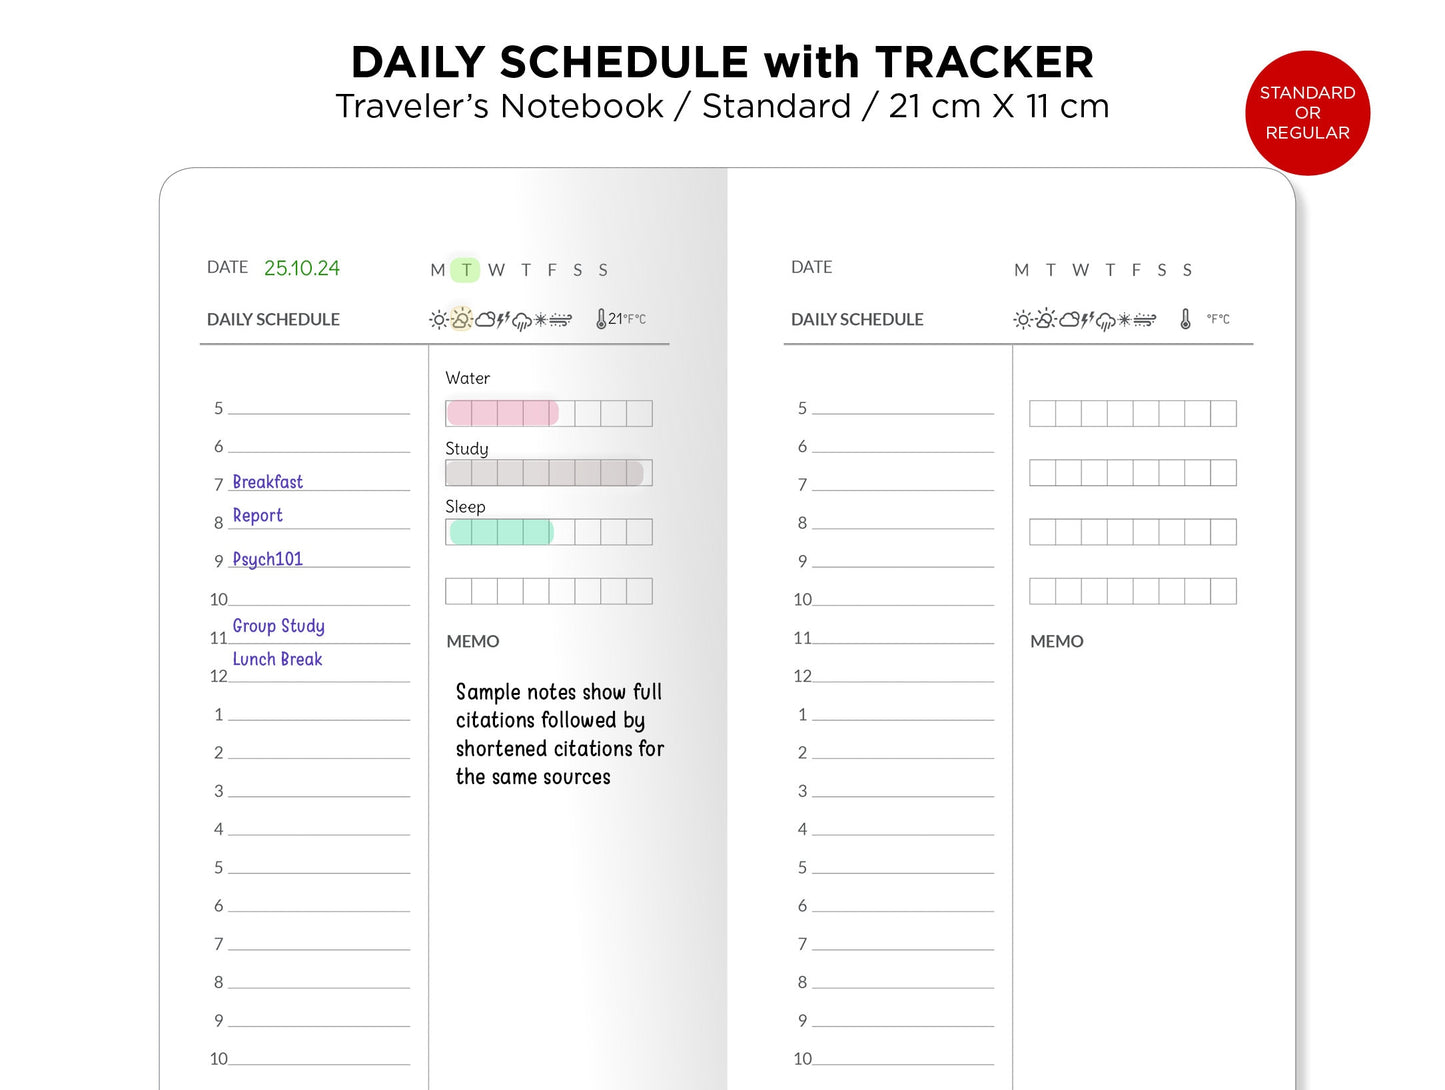 Daily SCHEDULE with TRACKER Timetable with Habit Tracker Printable Insert Traveler's Notebook